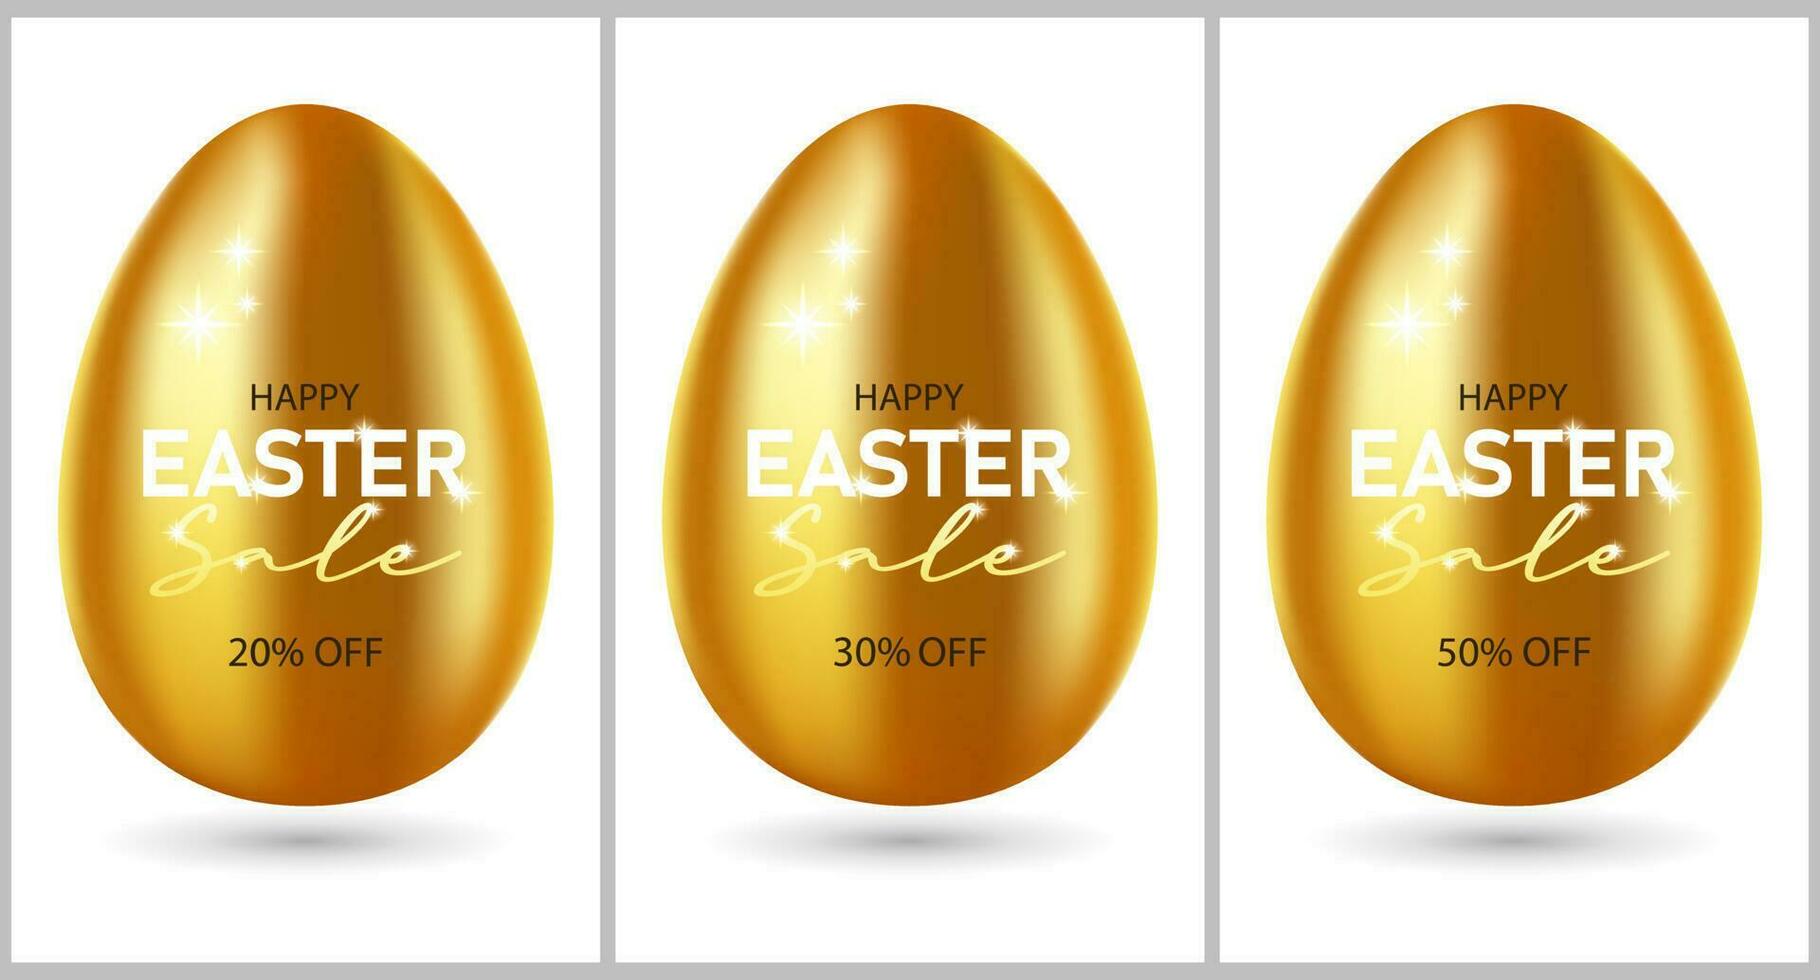 Golden Easter eggs and text Happy Easter Sale. Icon set. 3d luxury illustration vector